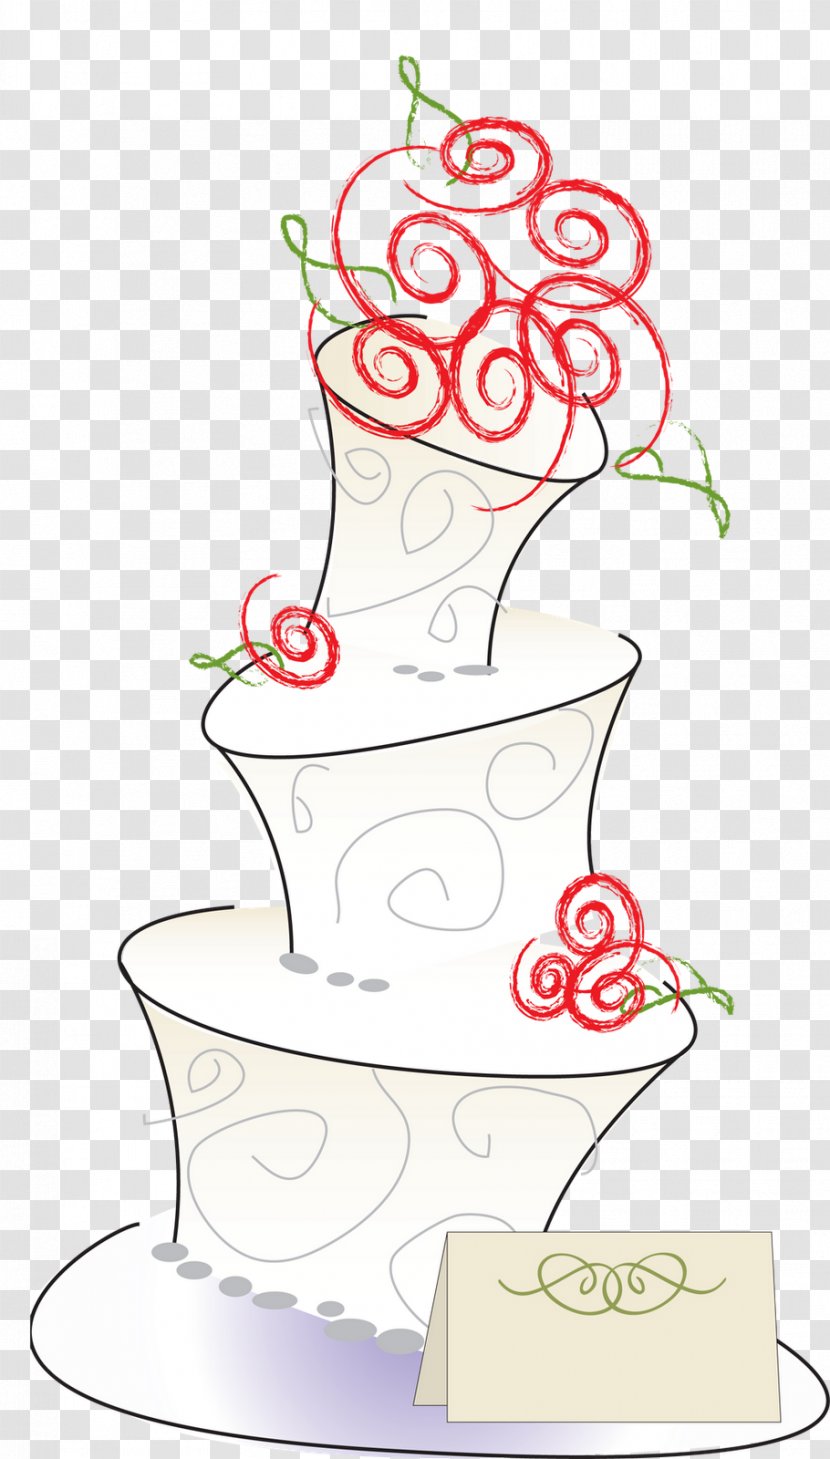 Wedding Cake Cupcake Birthday Clip Art - Flowering Plant - Whimsical Cliparts Transparent PNG